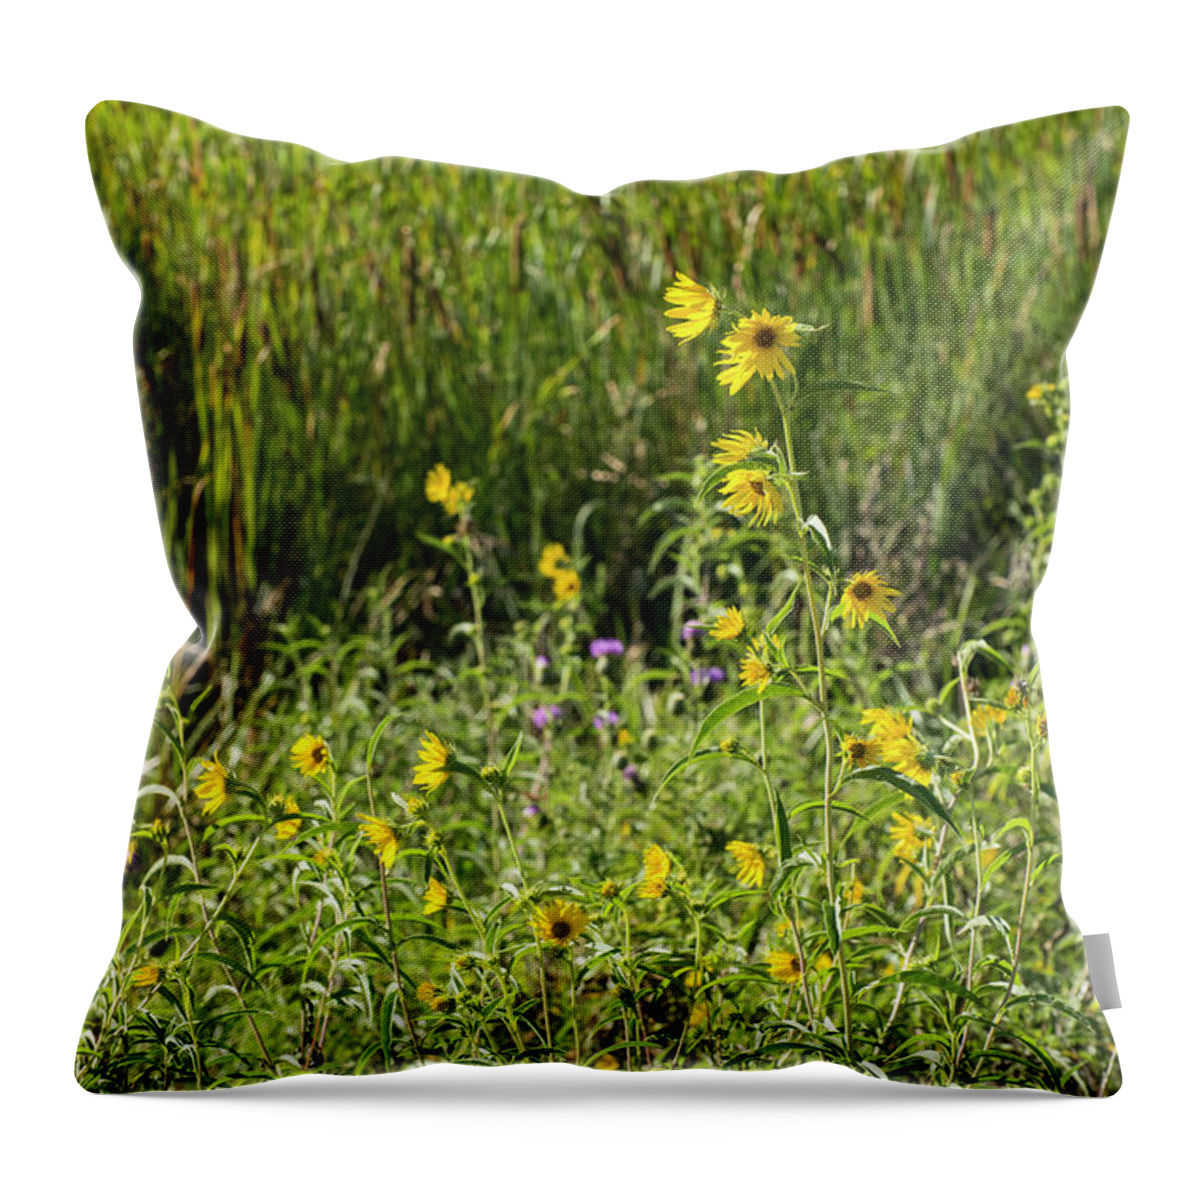 Sunflowers Throw Pillow featuring the photograph DDP DJD Sunflowers 2619 by David Drew